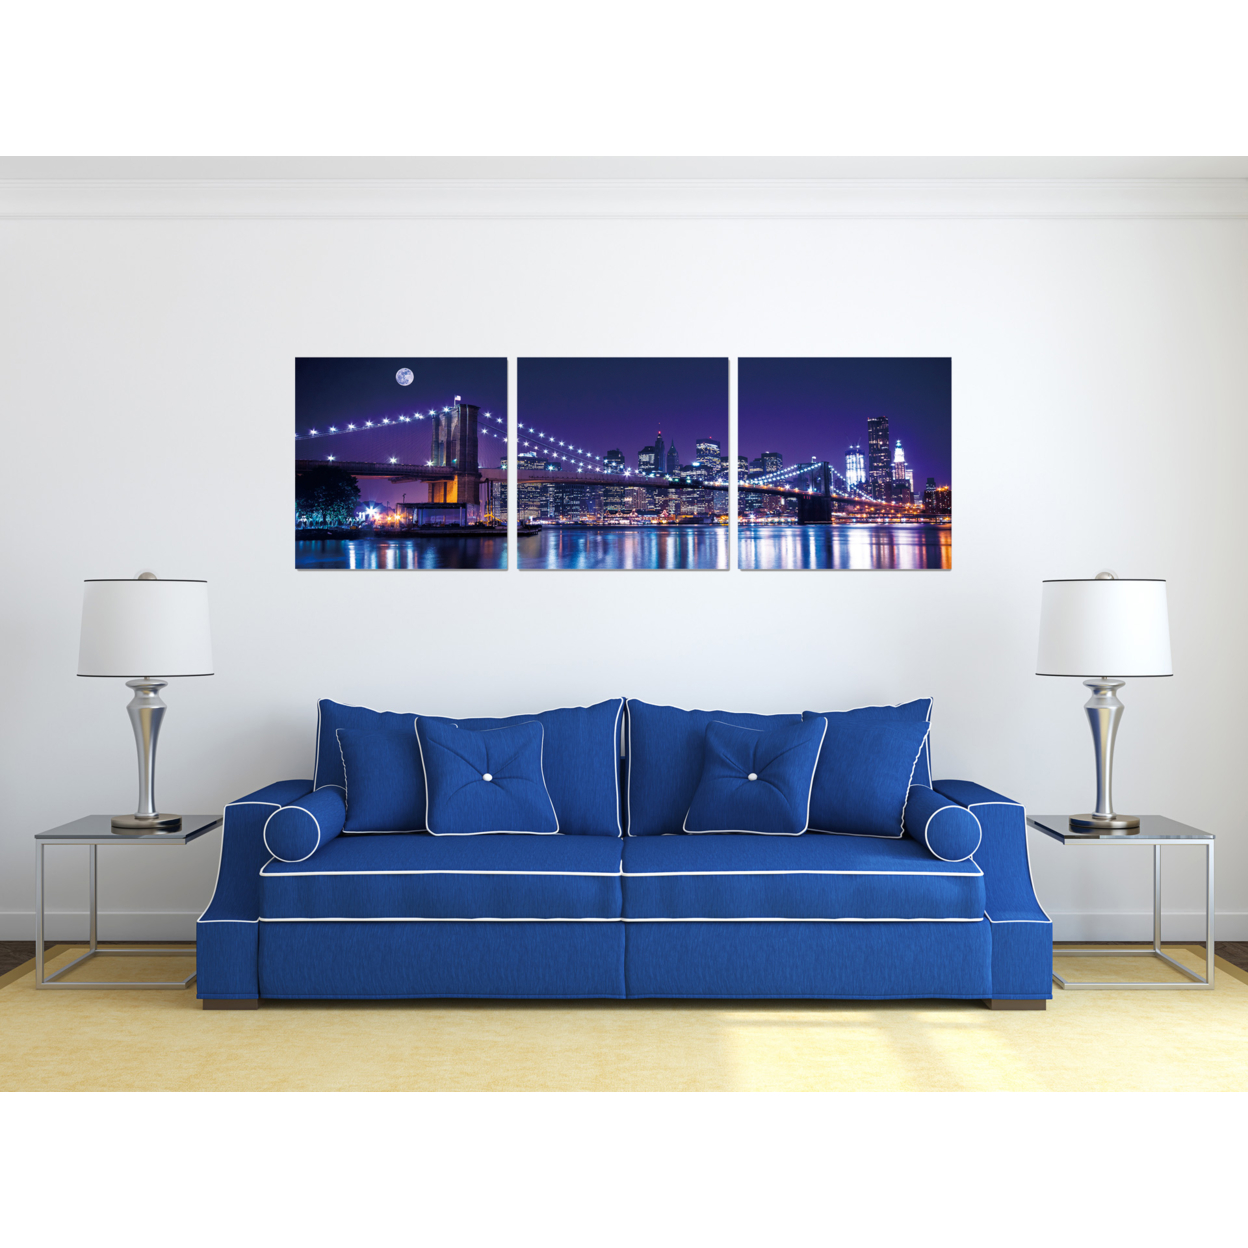 Cityline 3 Piece Wrapped Canvas Wall Art Print 27.5x82 Inches